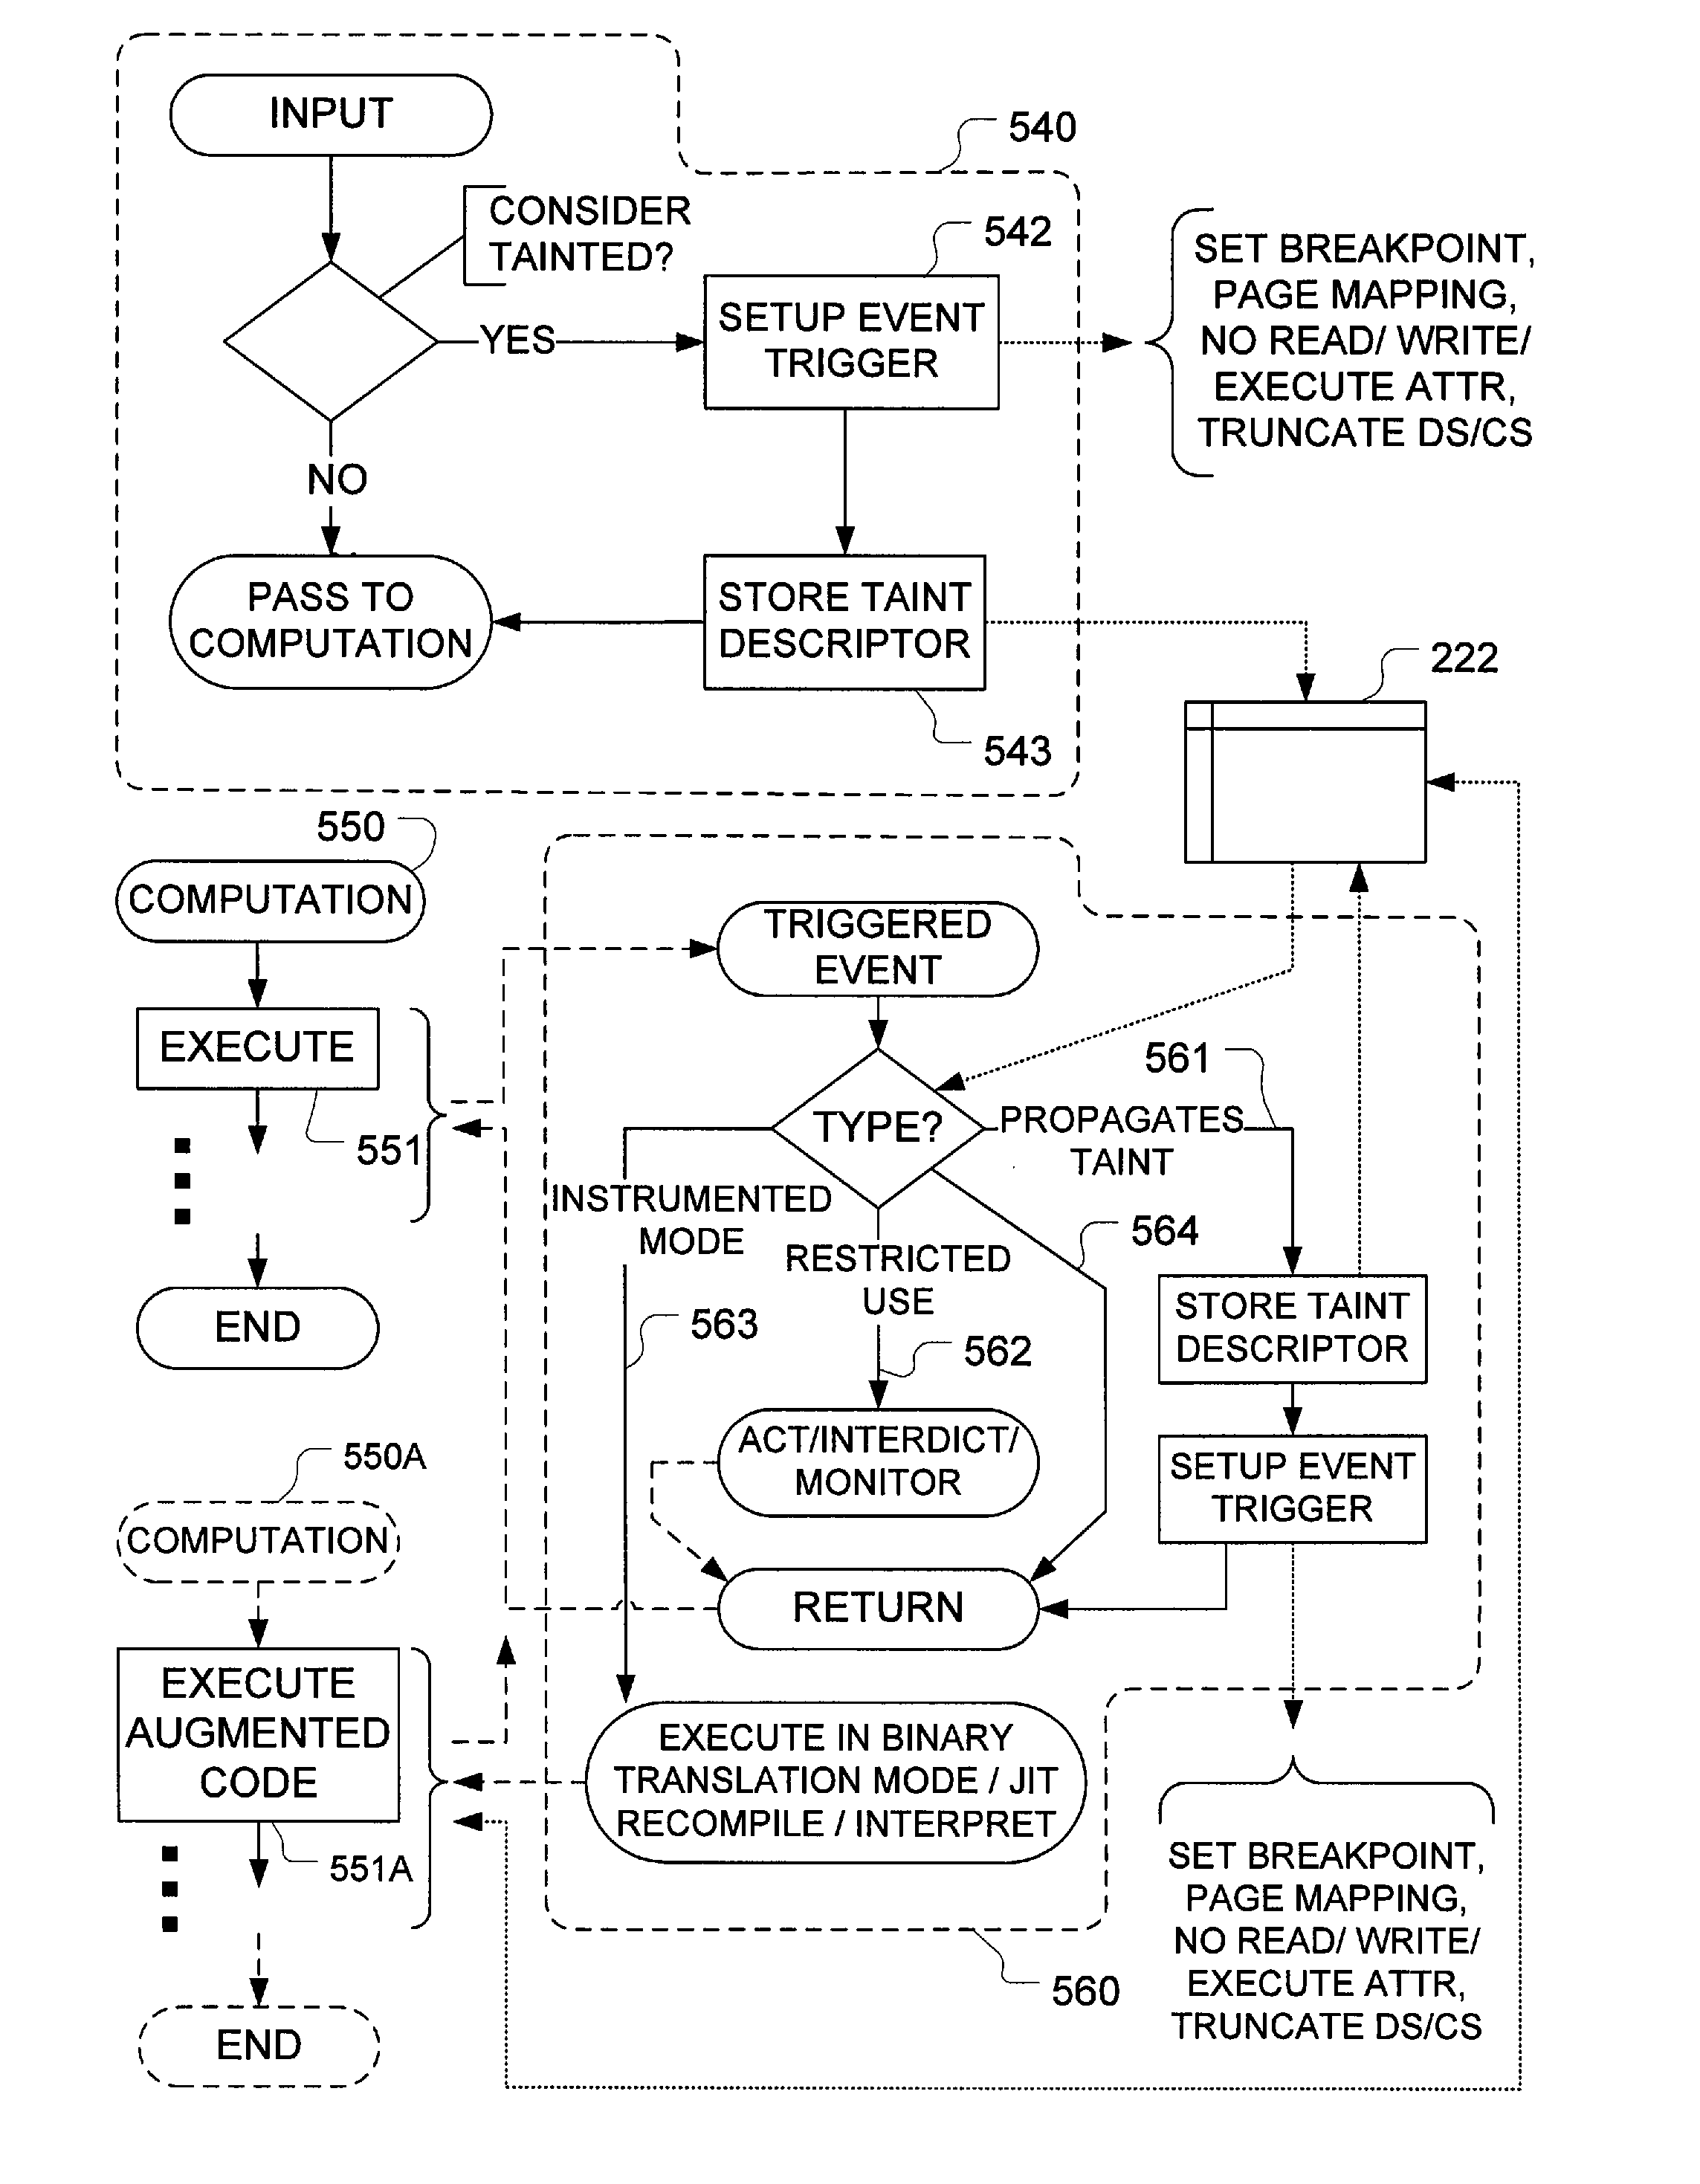 Computational system including mechanisms for tracking propagation of information with aging